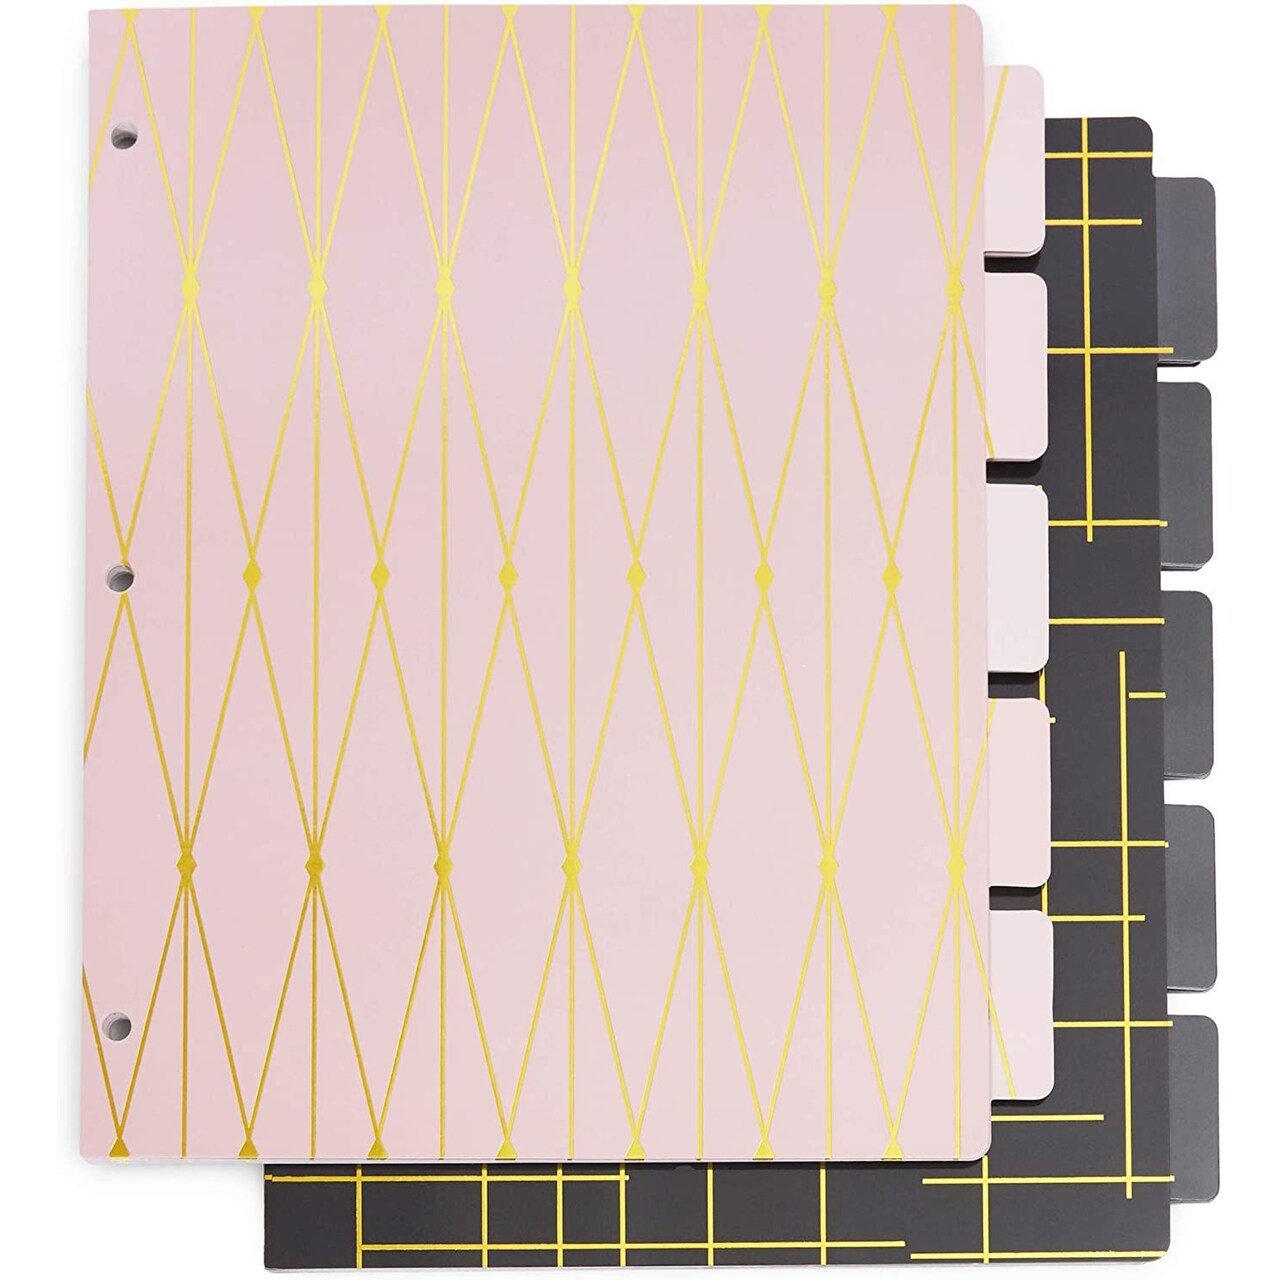 Total 30 Tabs Glitter 3 Ring Binder Dividers, Office and School Supplies, Pink and Black (8.5 x 11 In)